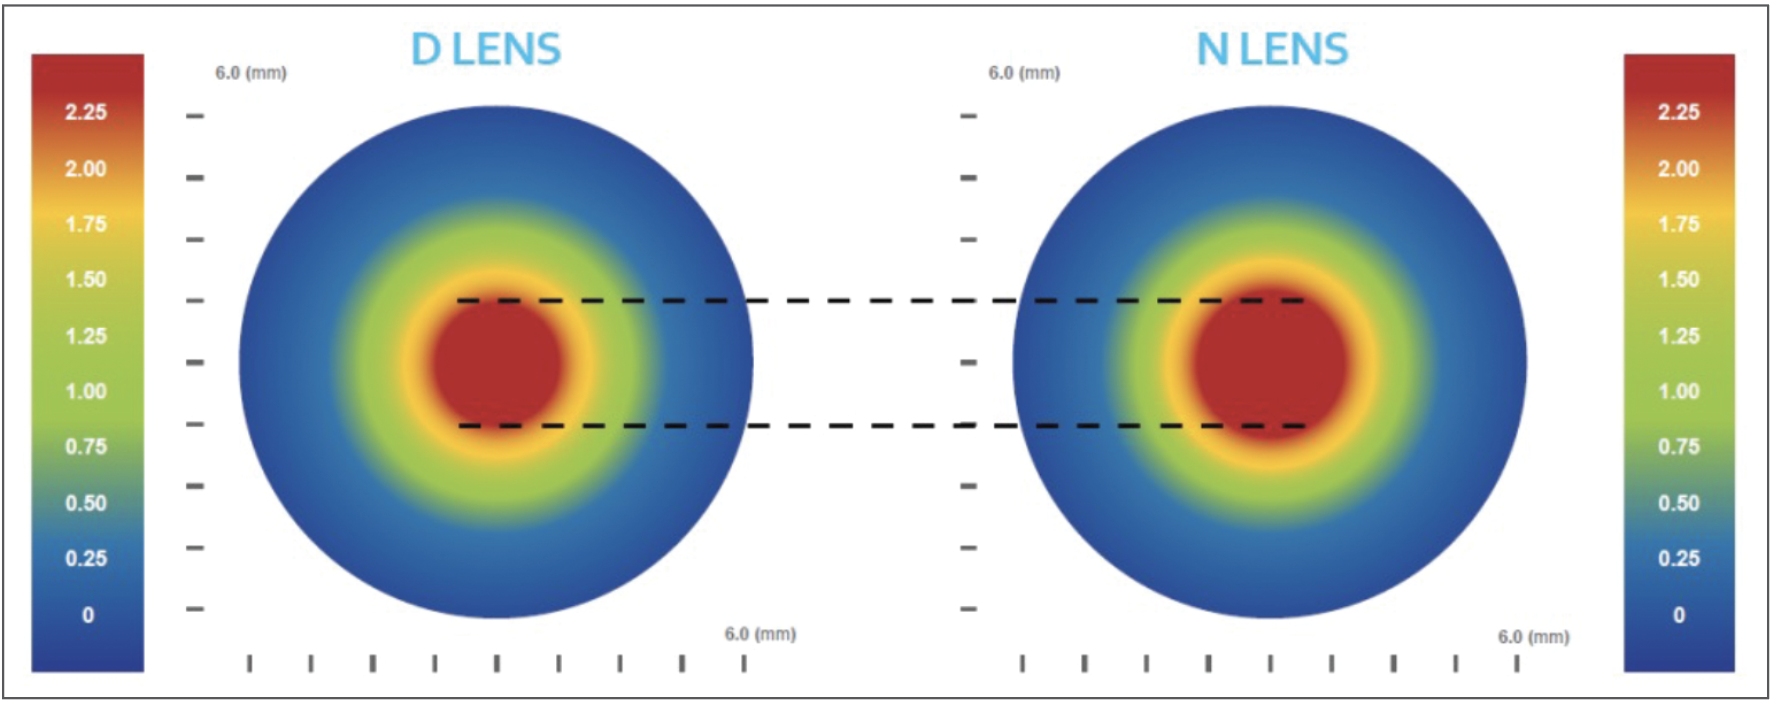 Fig. 6. The Onefit scleral lens MF features an adjustable near-zone diameter for the dominant (“D” lens) and non-dominant (“N” lens) eye.